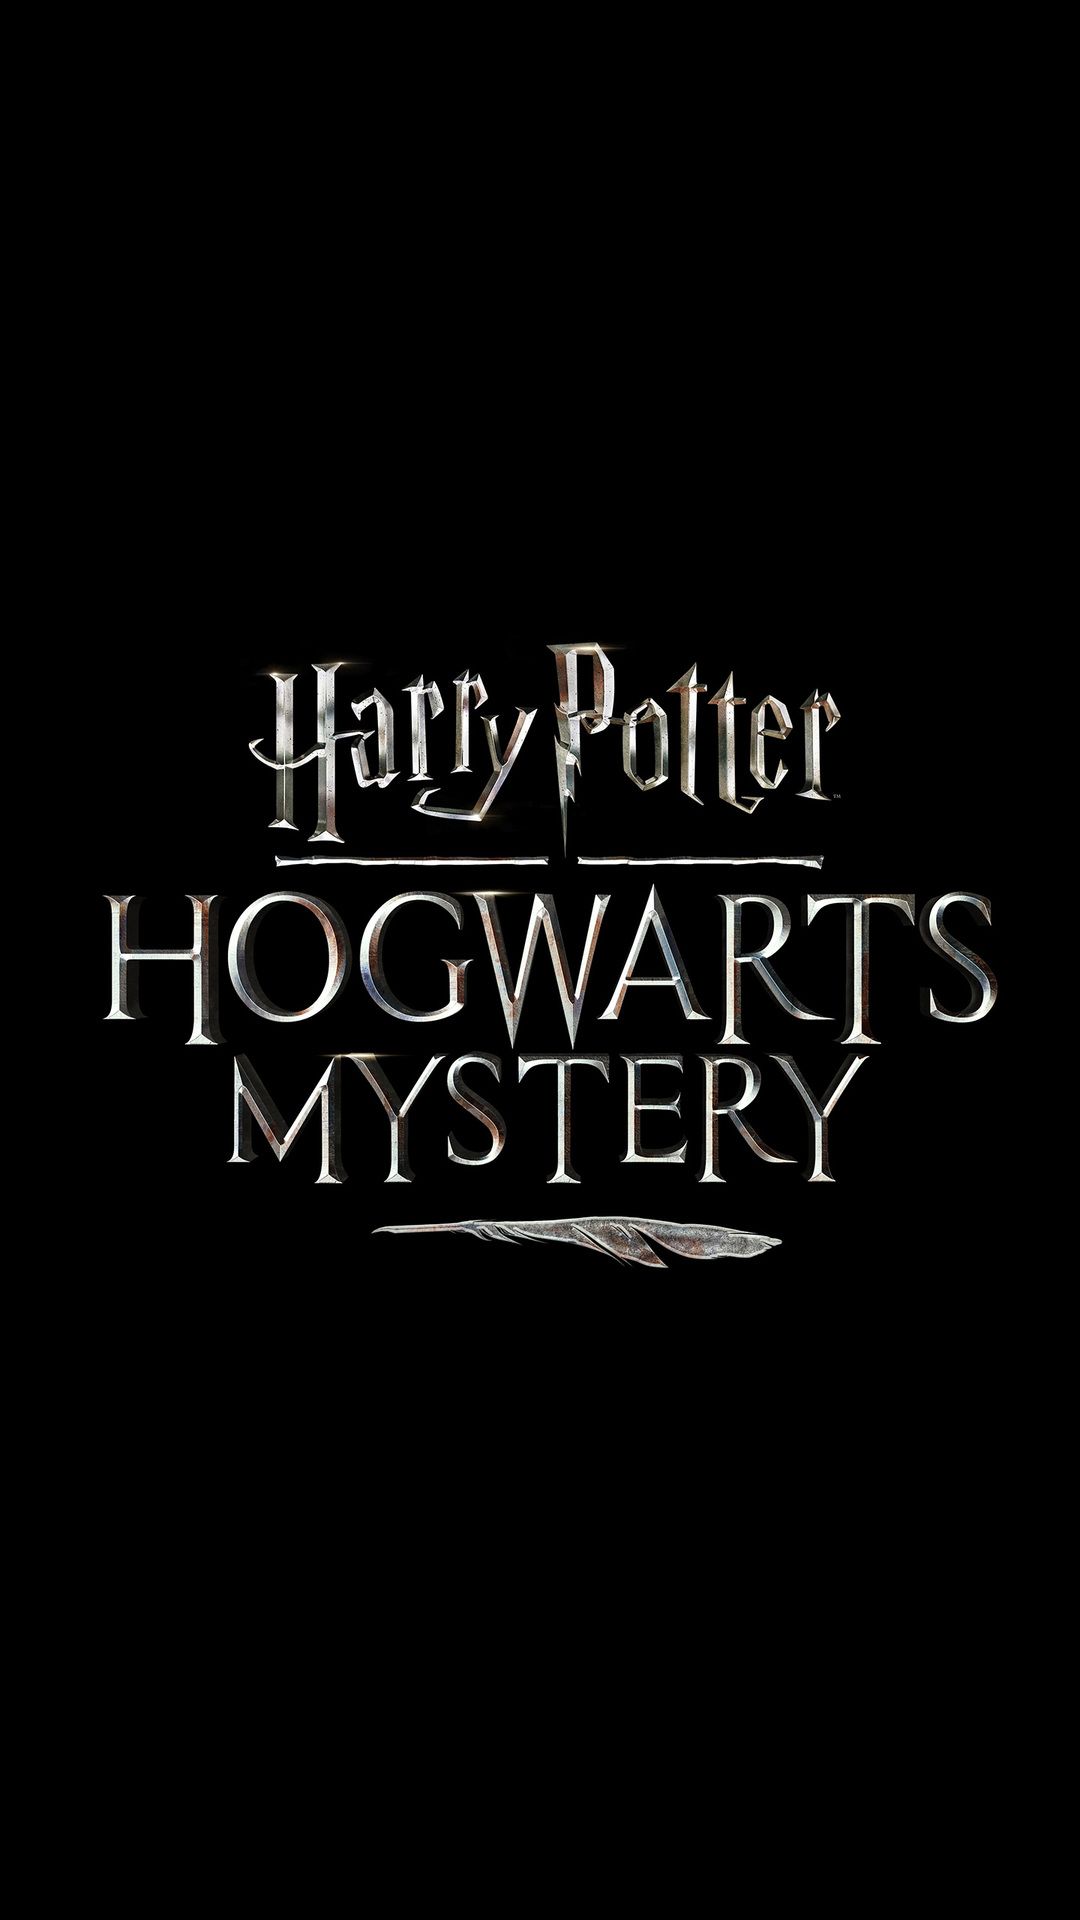 1080x1920 harry potter hogwarts mystery, games, logo, hd, 5k for iPhone 8 wallpaper